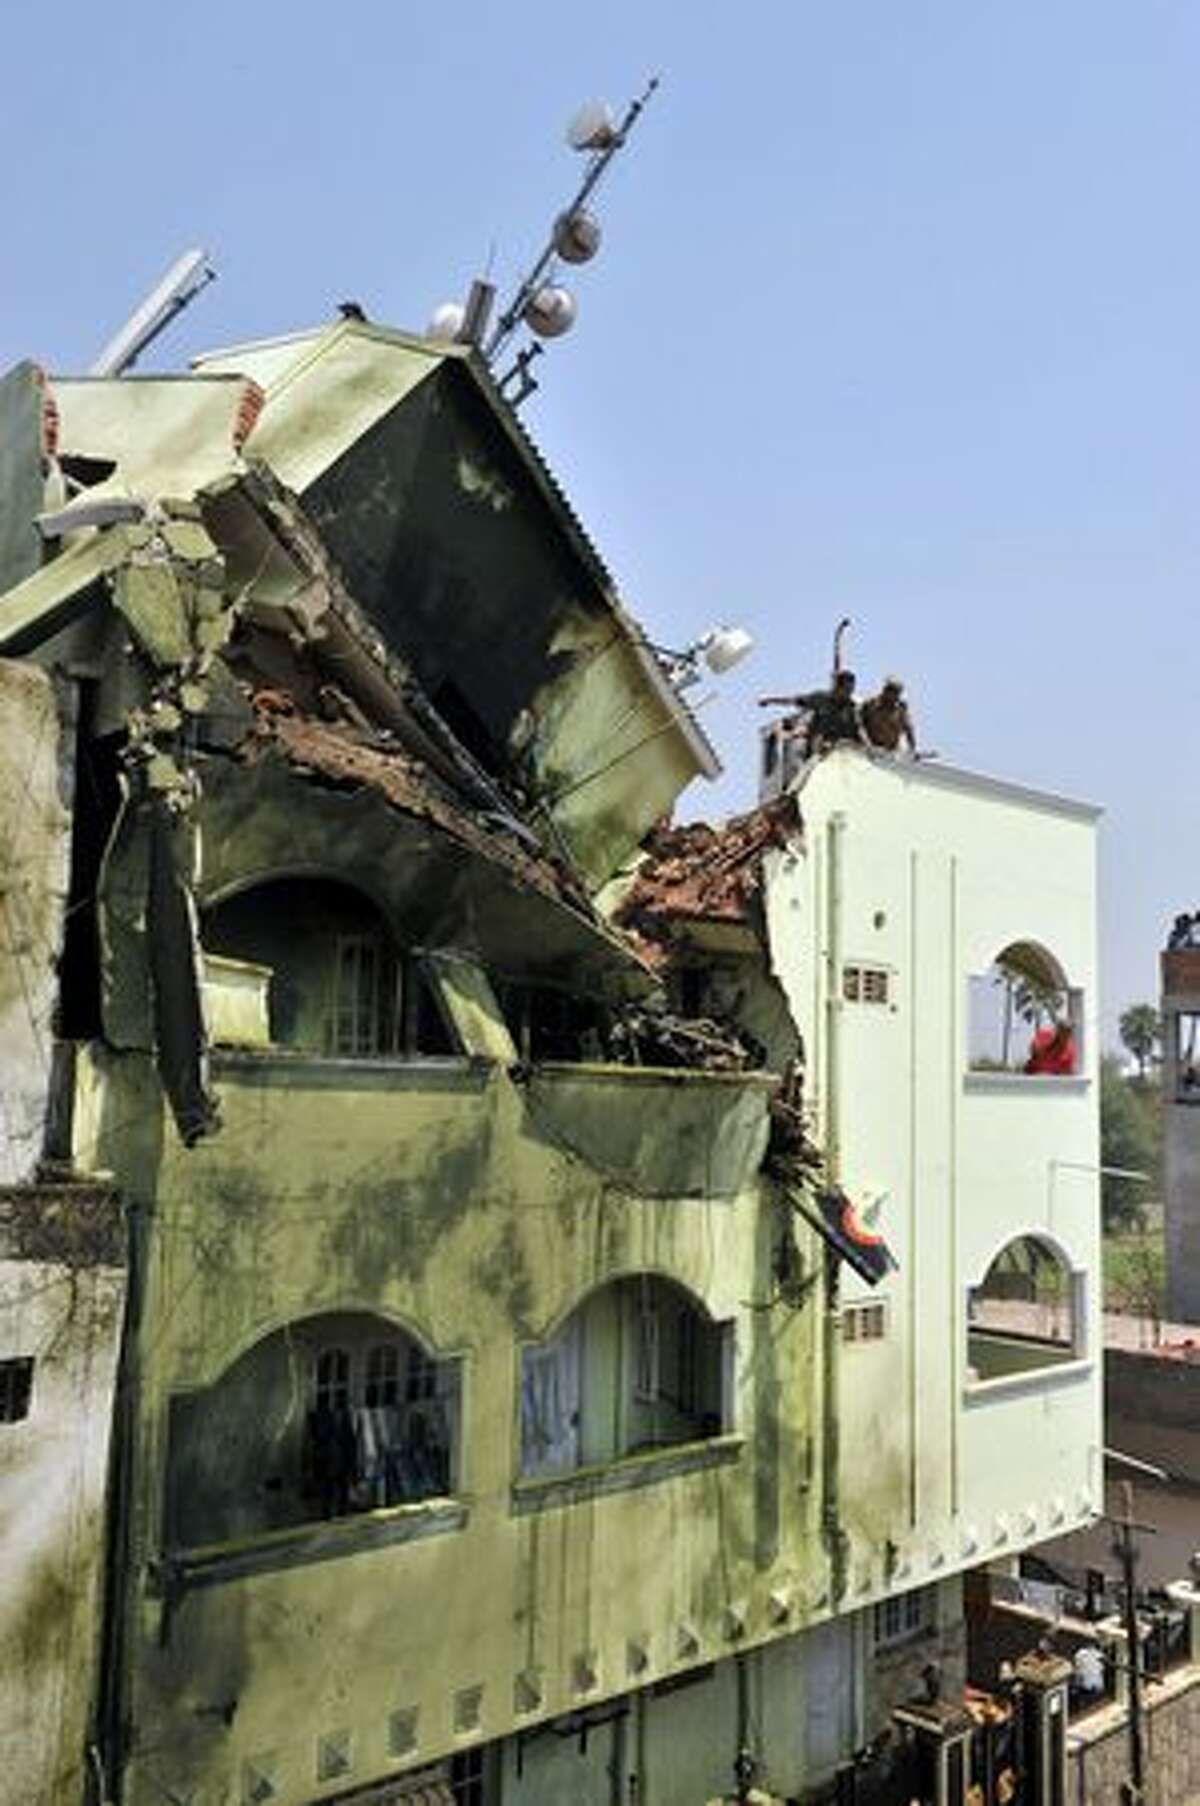 Indian residents and rescue officials search the wreckage of a building after an Indian Naval aircraft from the Aerobatic Team 'Surya Kiran' crashed during the India Aviation 2010 show at Begumpet Airport in Hyderabad on March 3, 2010. A navy aircraft taking part in an acrobatics show on the first day of an air show in the southern Indian city. The plane, a two-seater Kiran MK-II built by the state-run Hindustan Aeronautics, was part of a four-plane formation when it crashed. The accident occurred on the opening day of the India Aviation 2010 show, a five-day civil aviation exhibition.